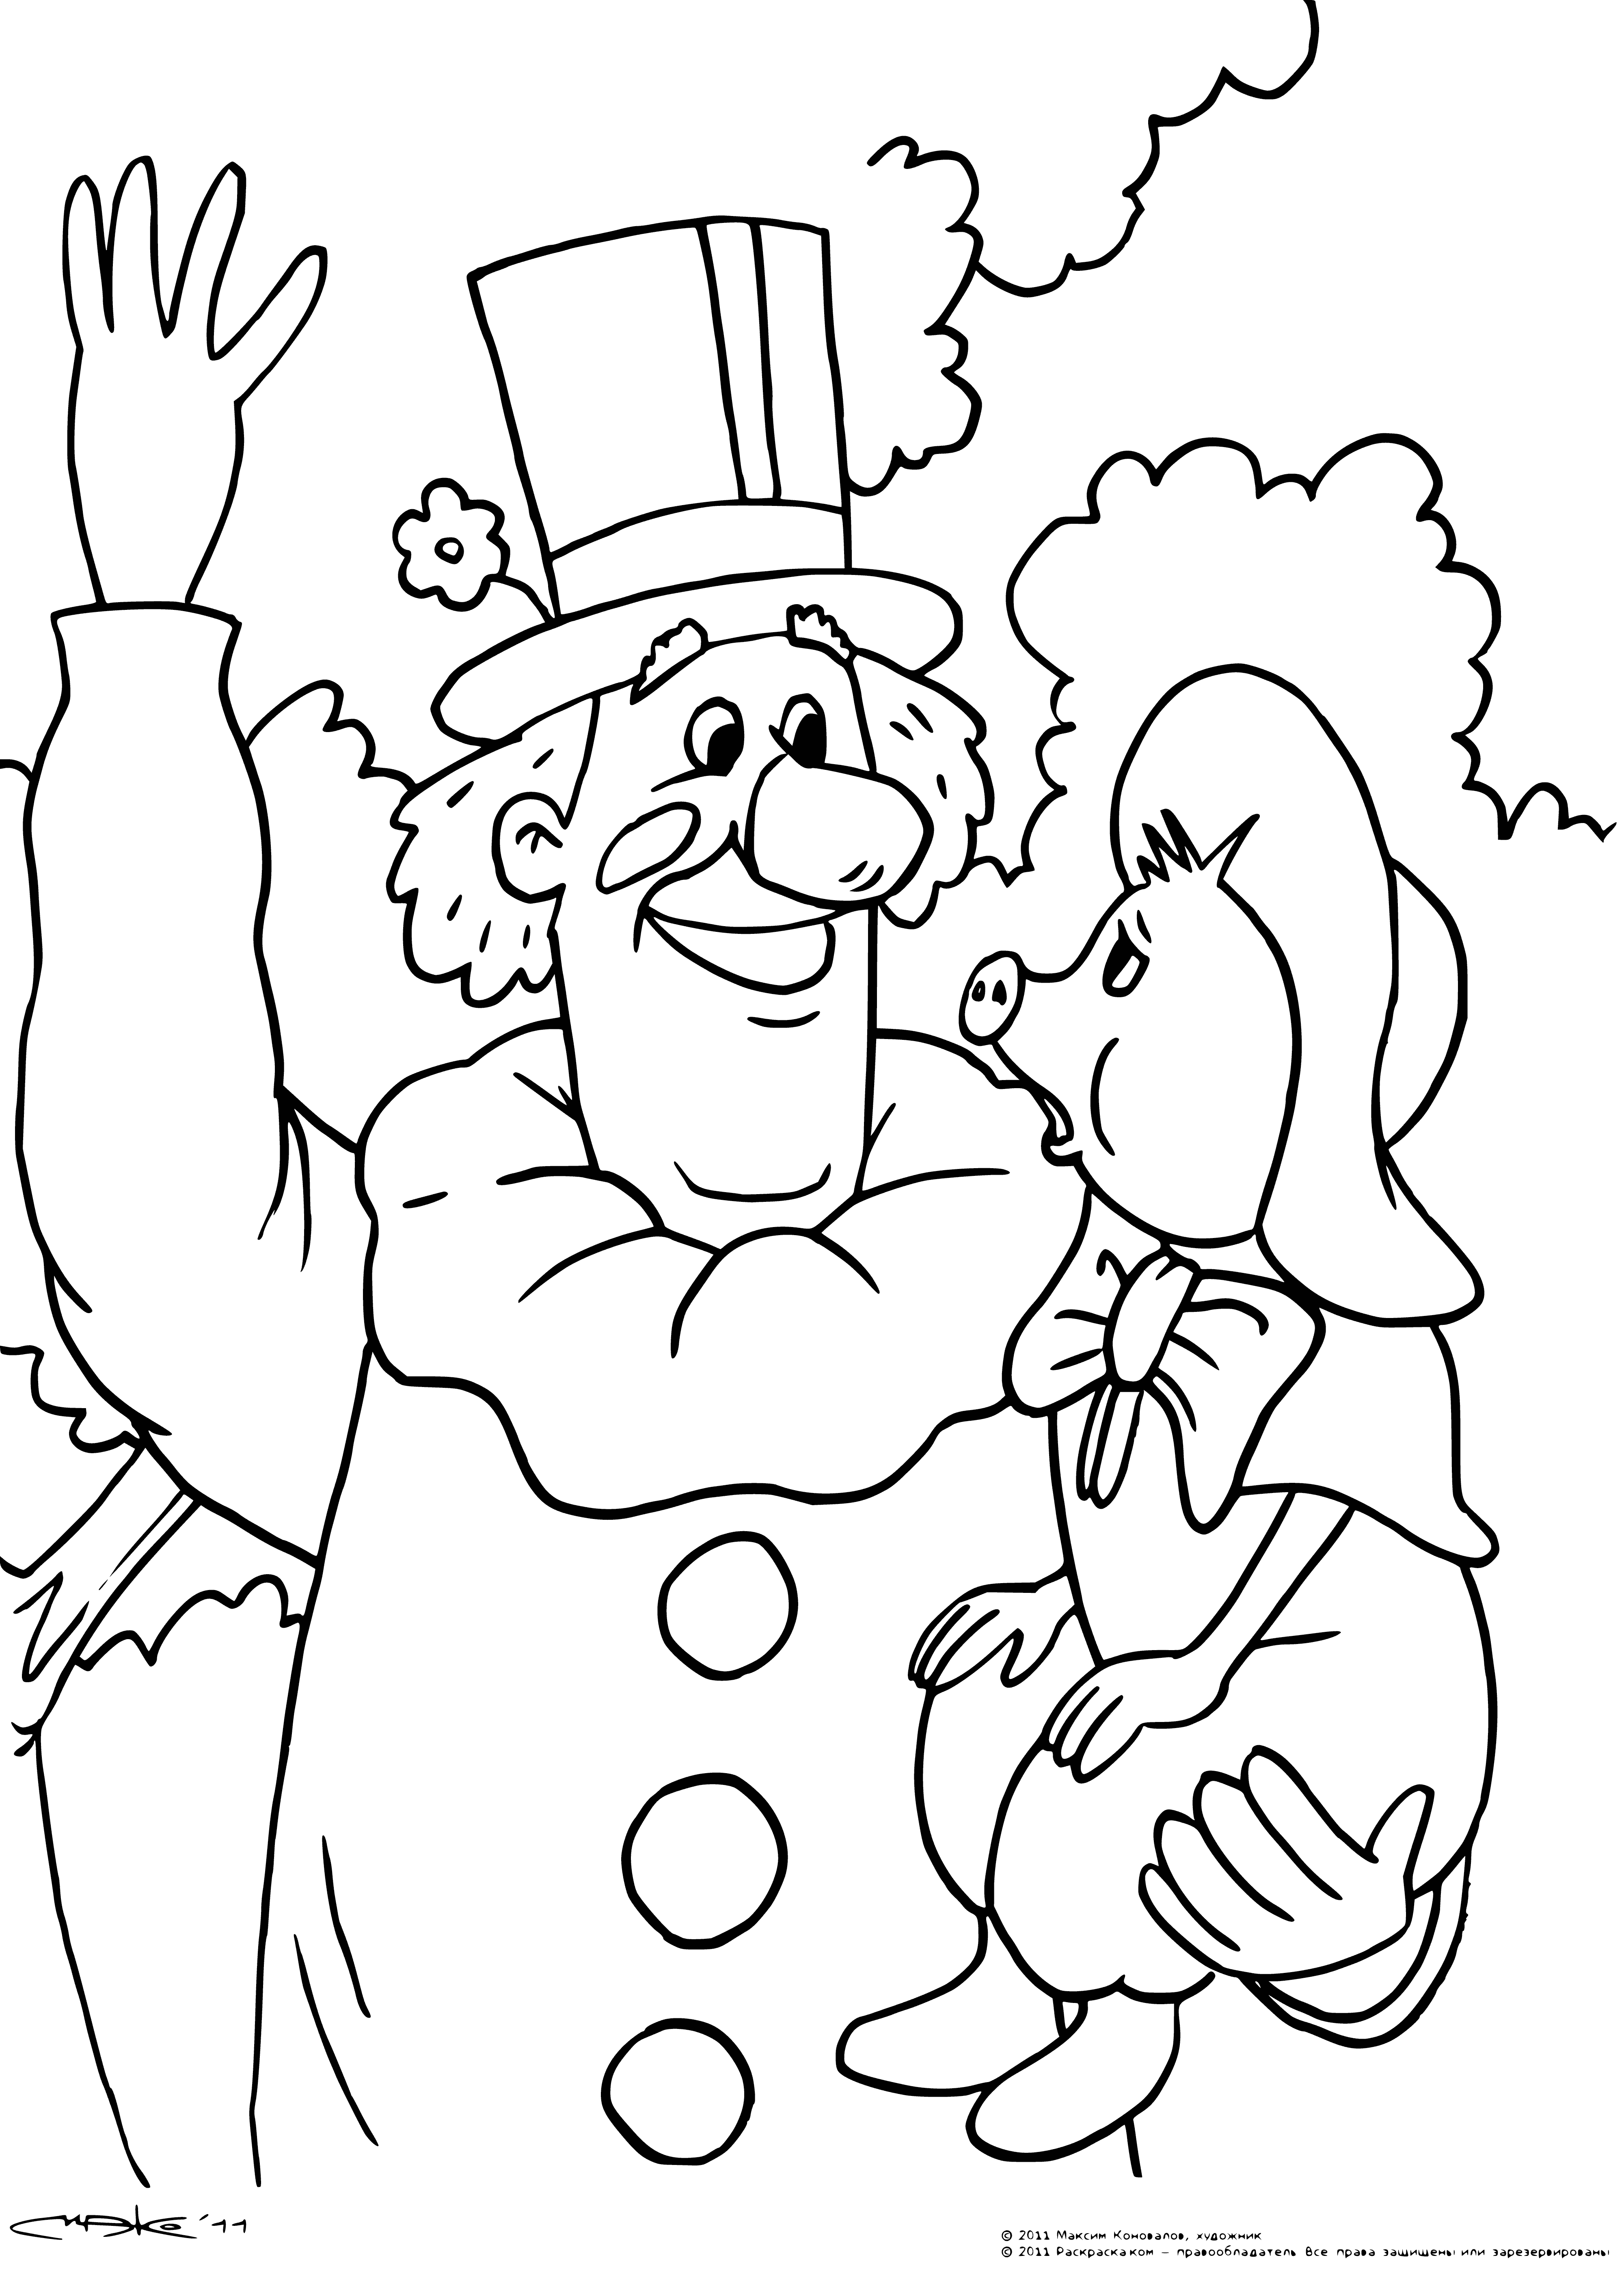 coloring page: Funtik is an artist driven to create unique works, always looking for inspiration. His talent is unquestioned.